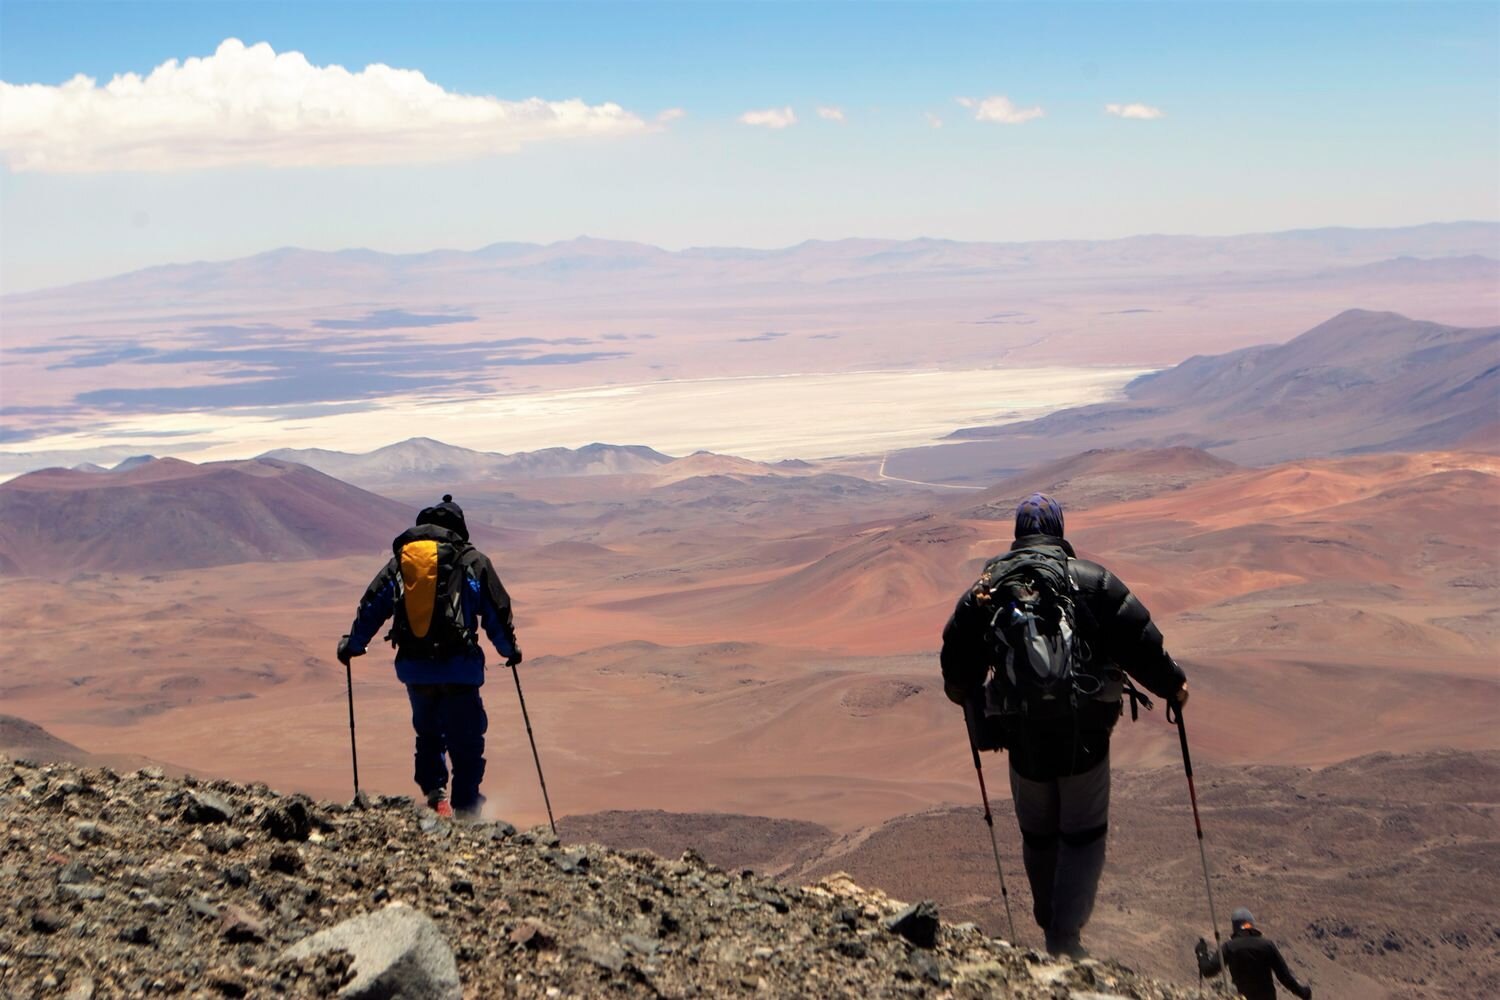  Team of climbers on an acclimatizing hike in the Chilean altiplano, with Atacama salt flat in the back ground. Chile 